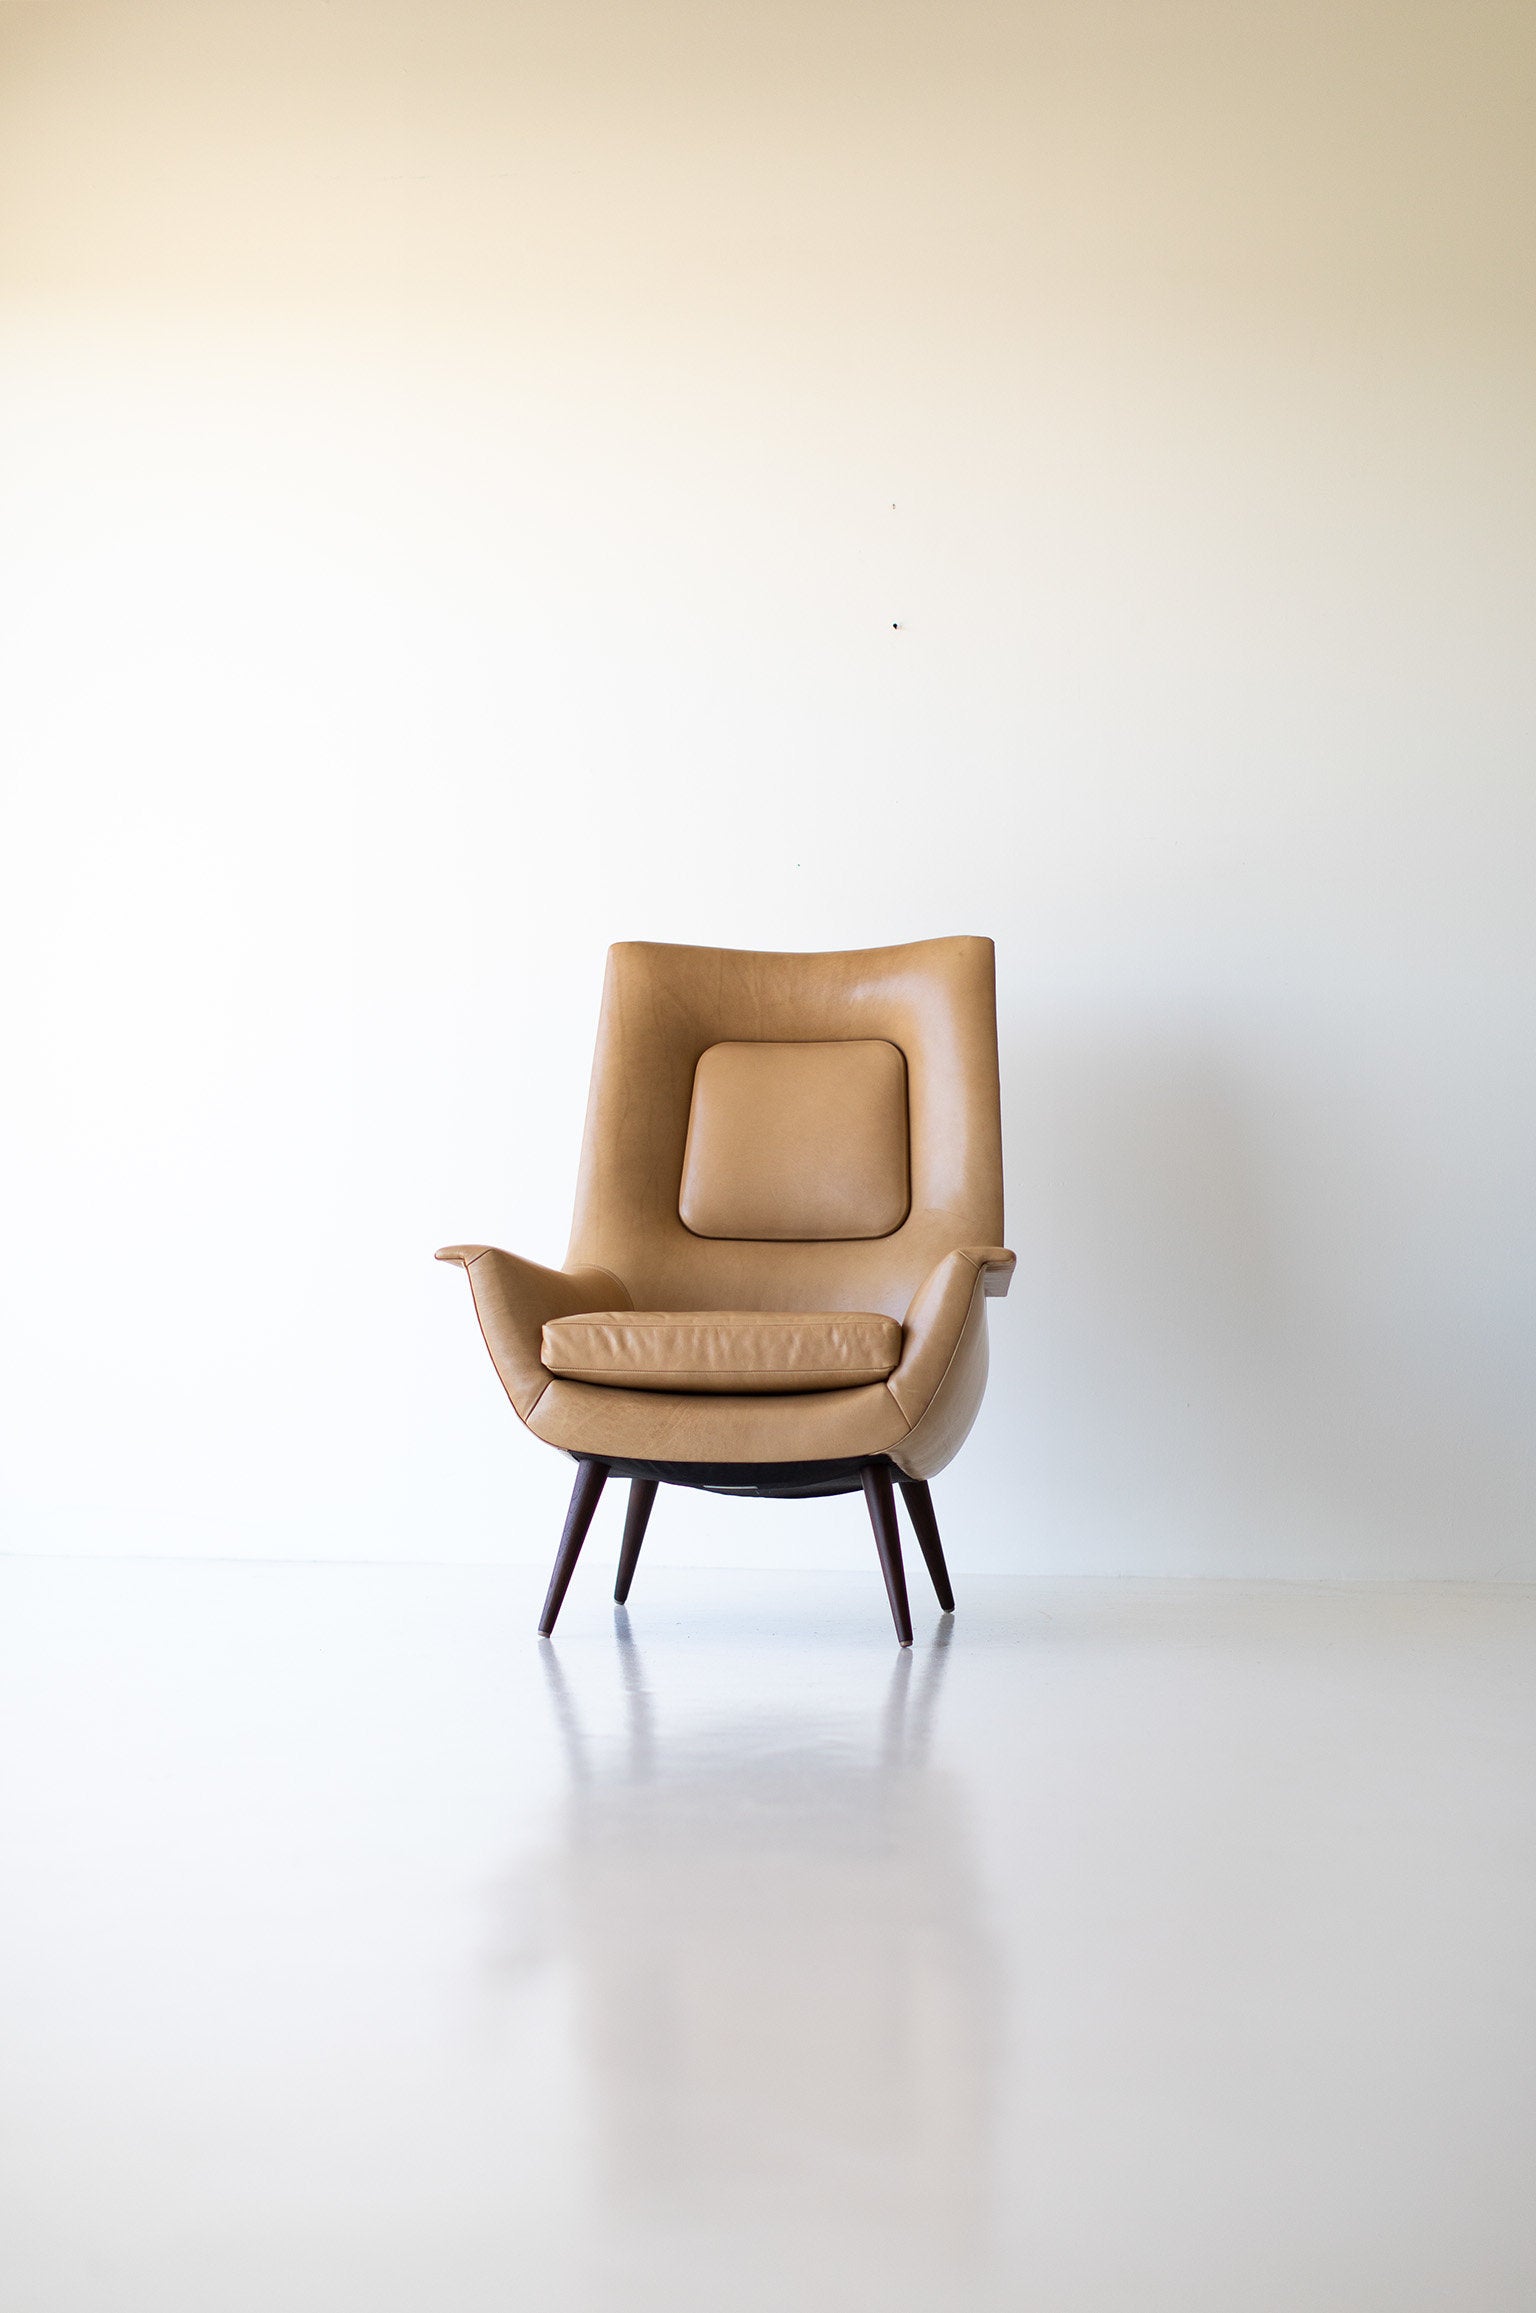 lawrence-peabody-chair-04